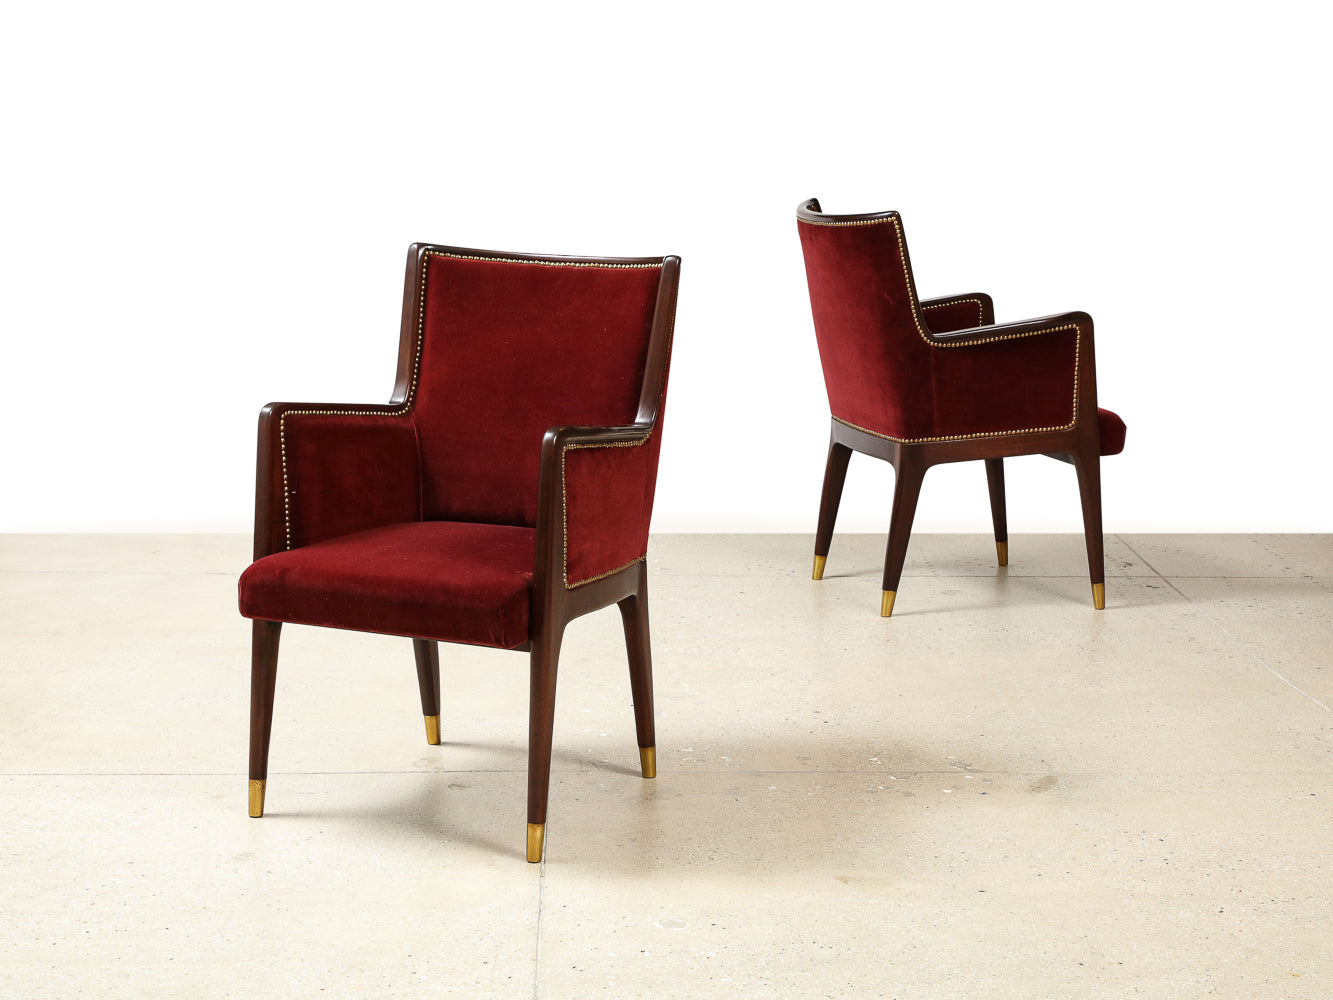 Pair of No. 504 Chairs by Gio Ponti